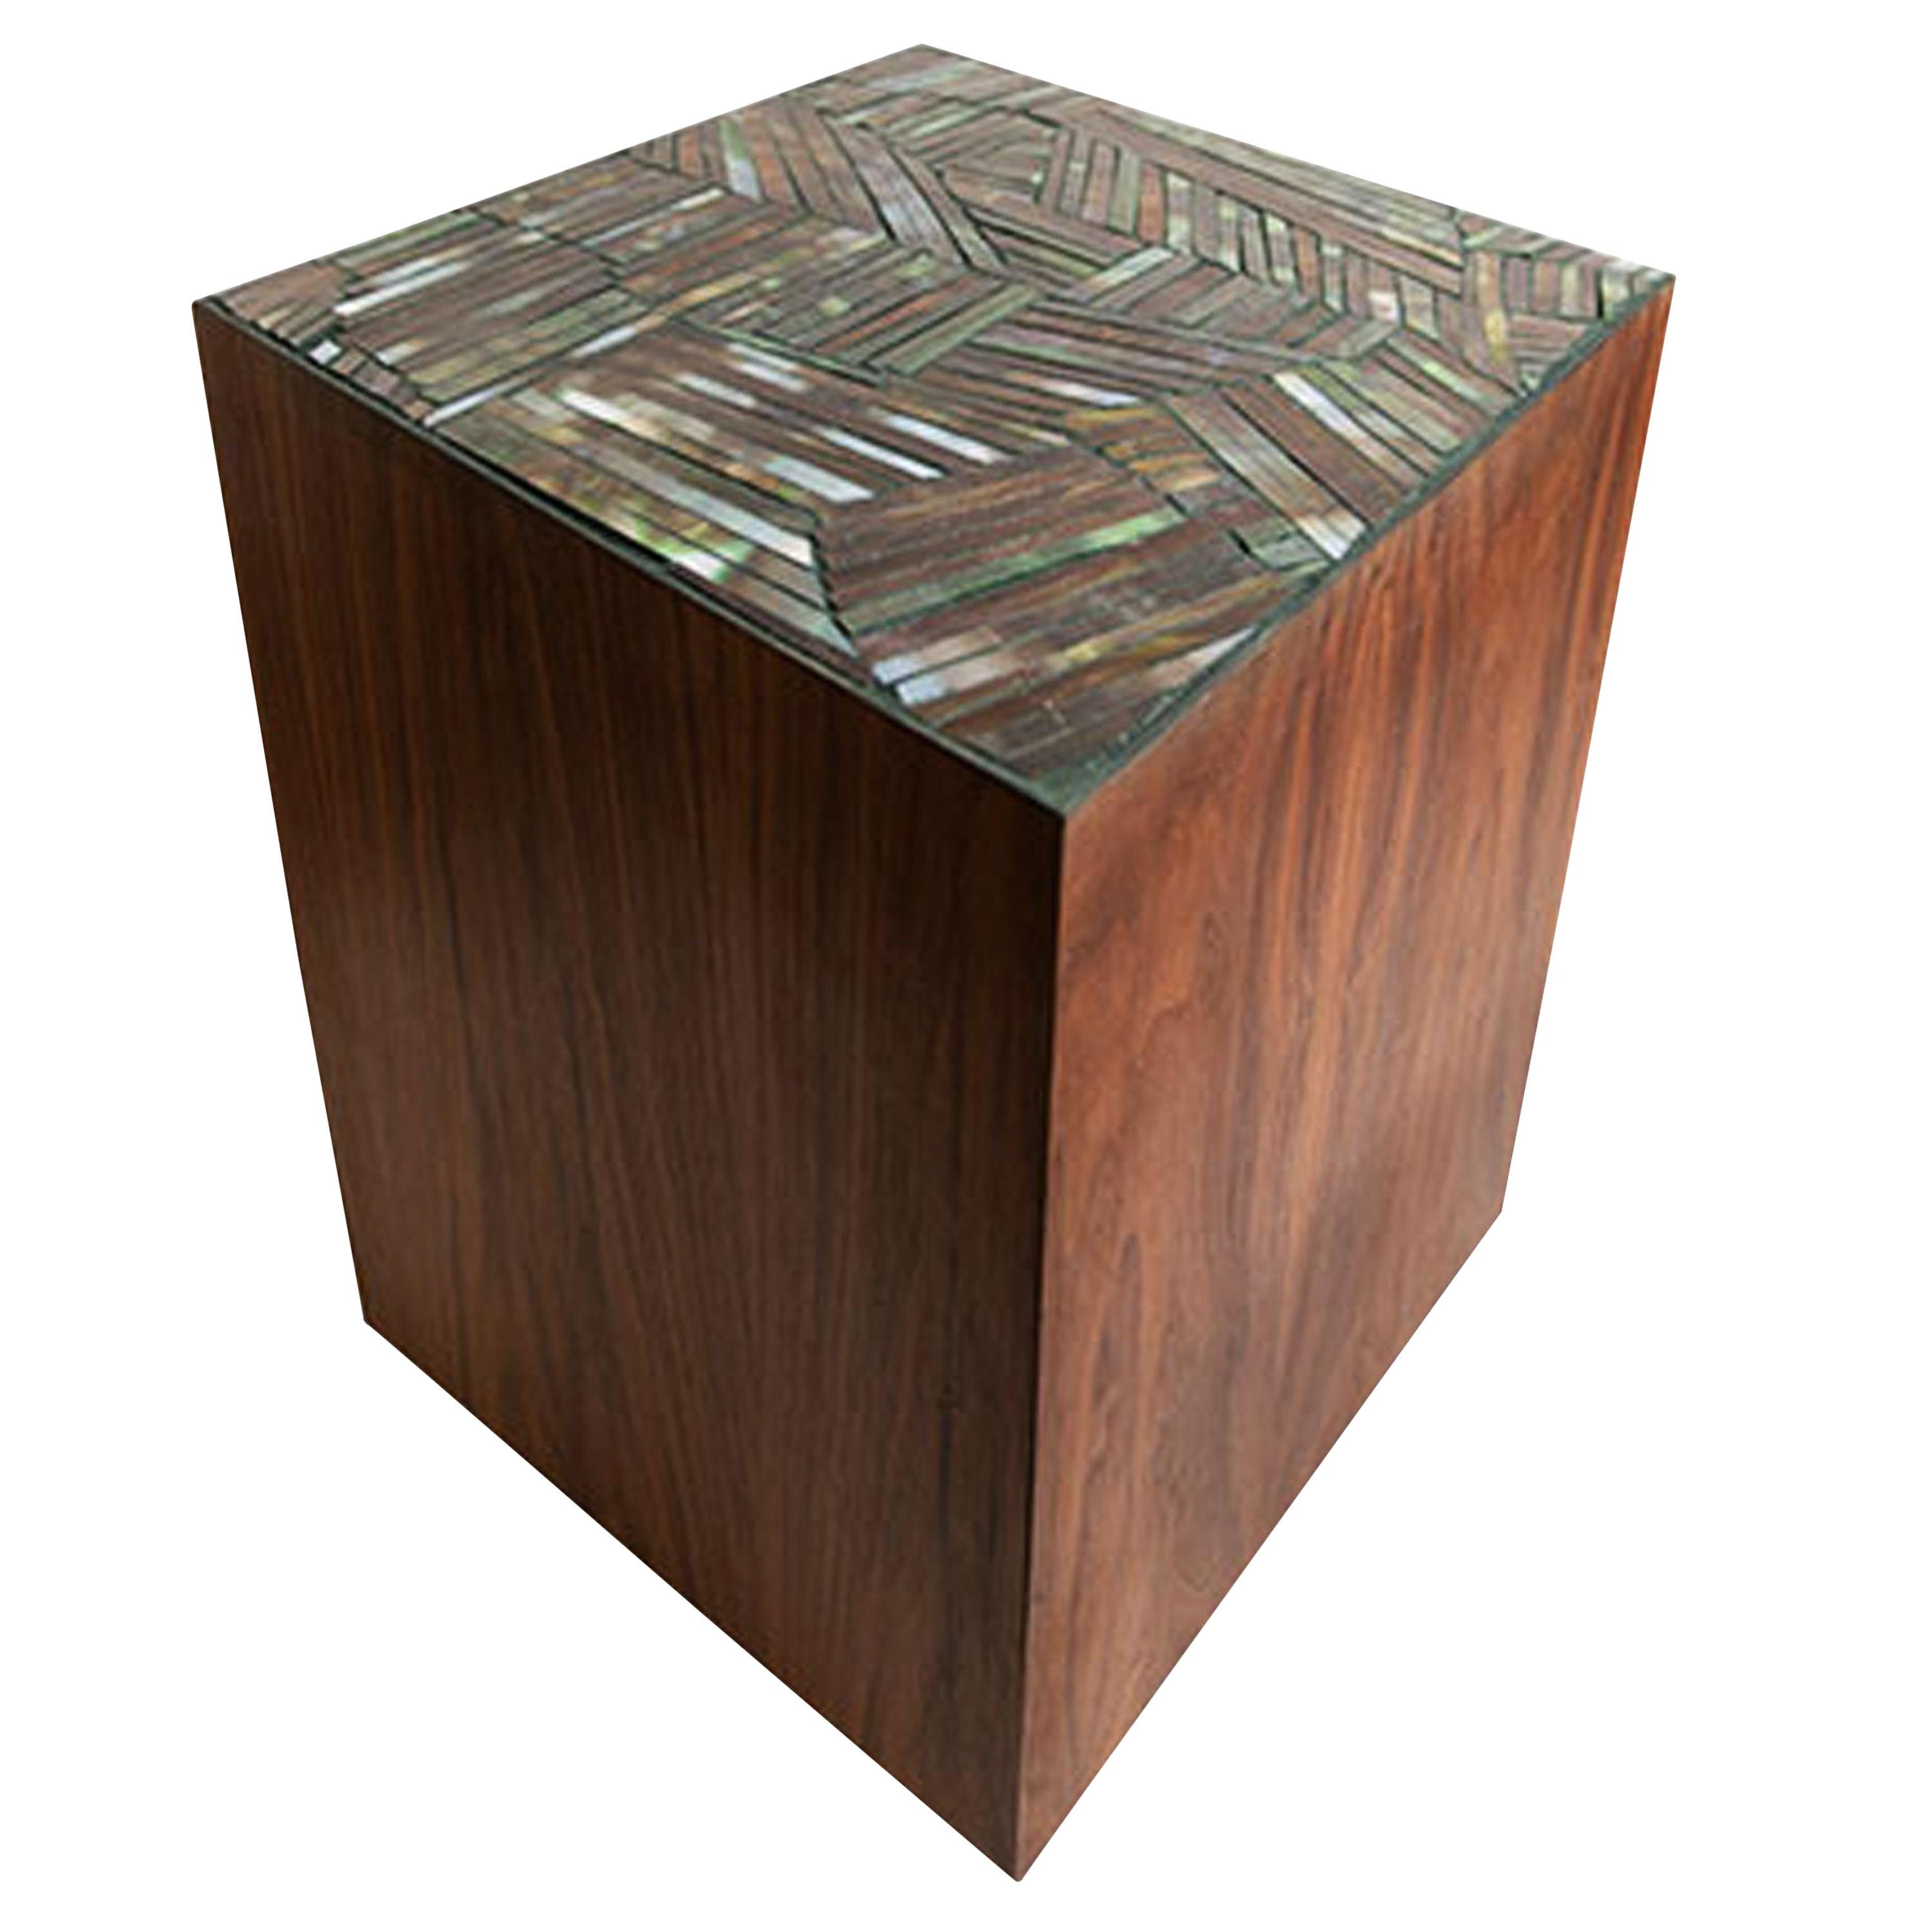 Modern Natura Brown Walnut Pedestal in Facets Glass Mosaic by Ercole Home